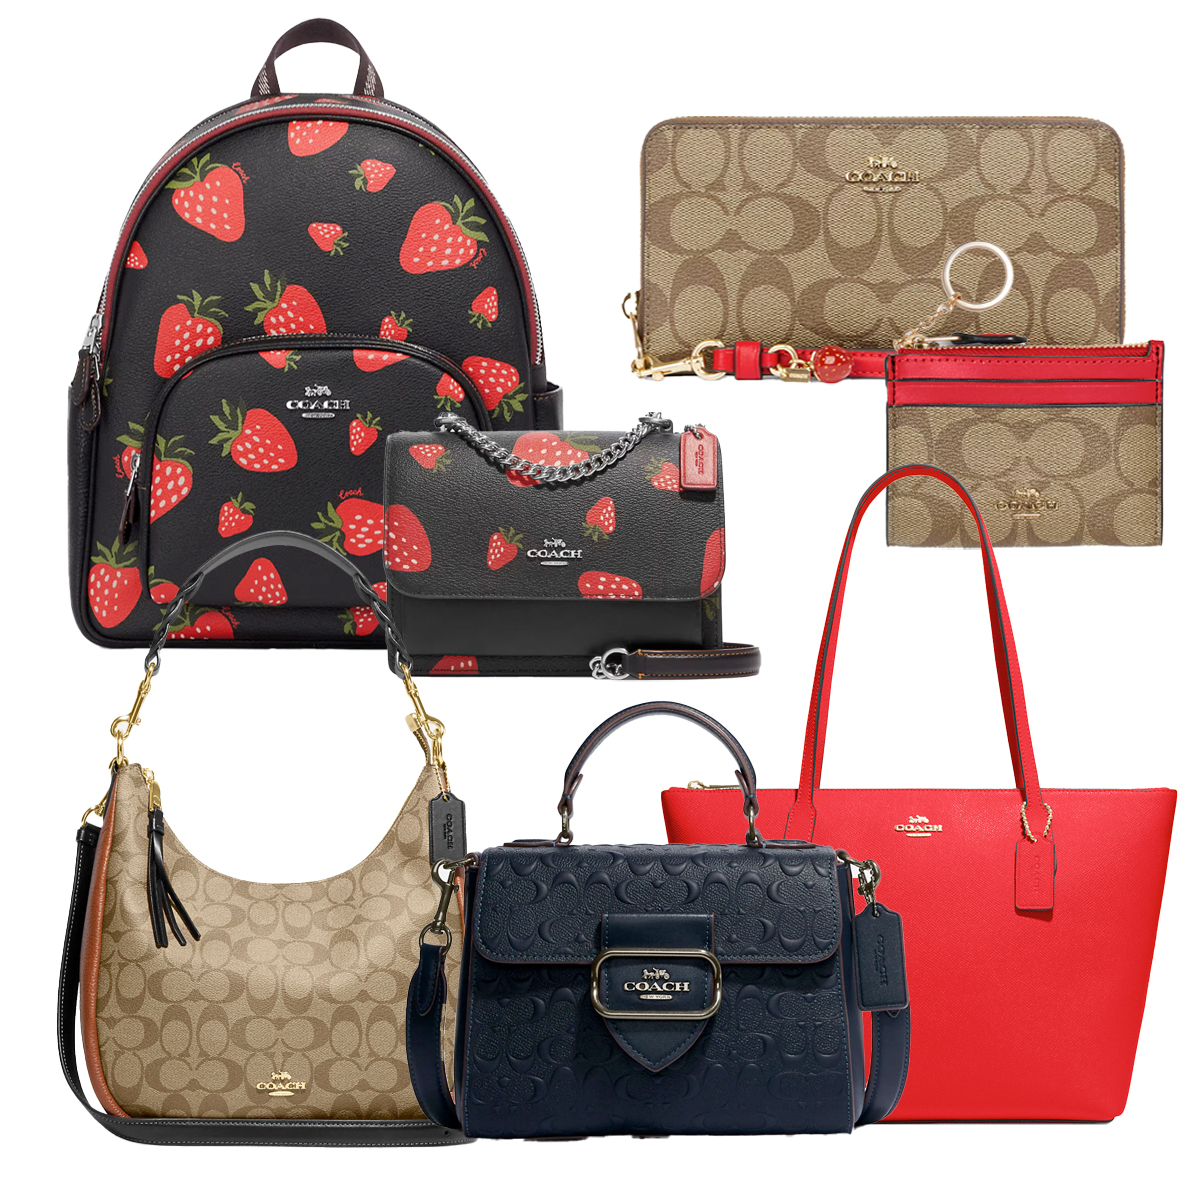 Coach Outlet clearance sale, up to 70% off handbags, wallets